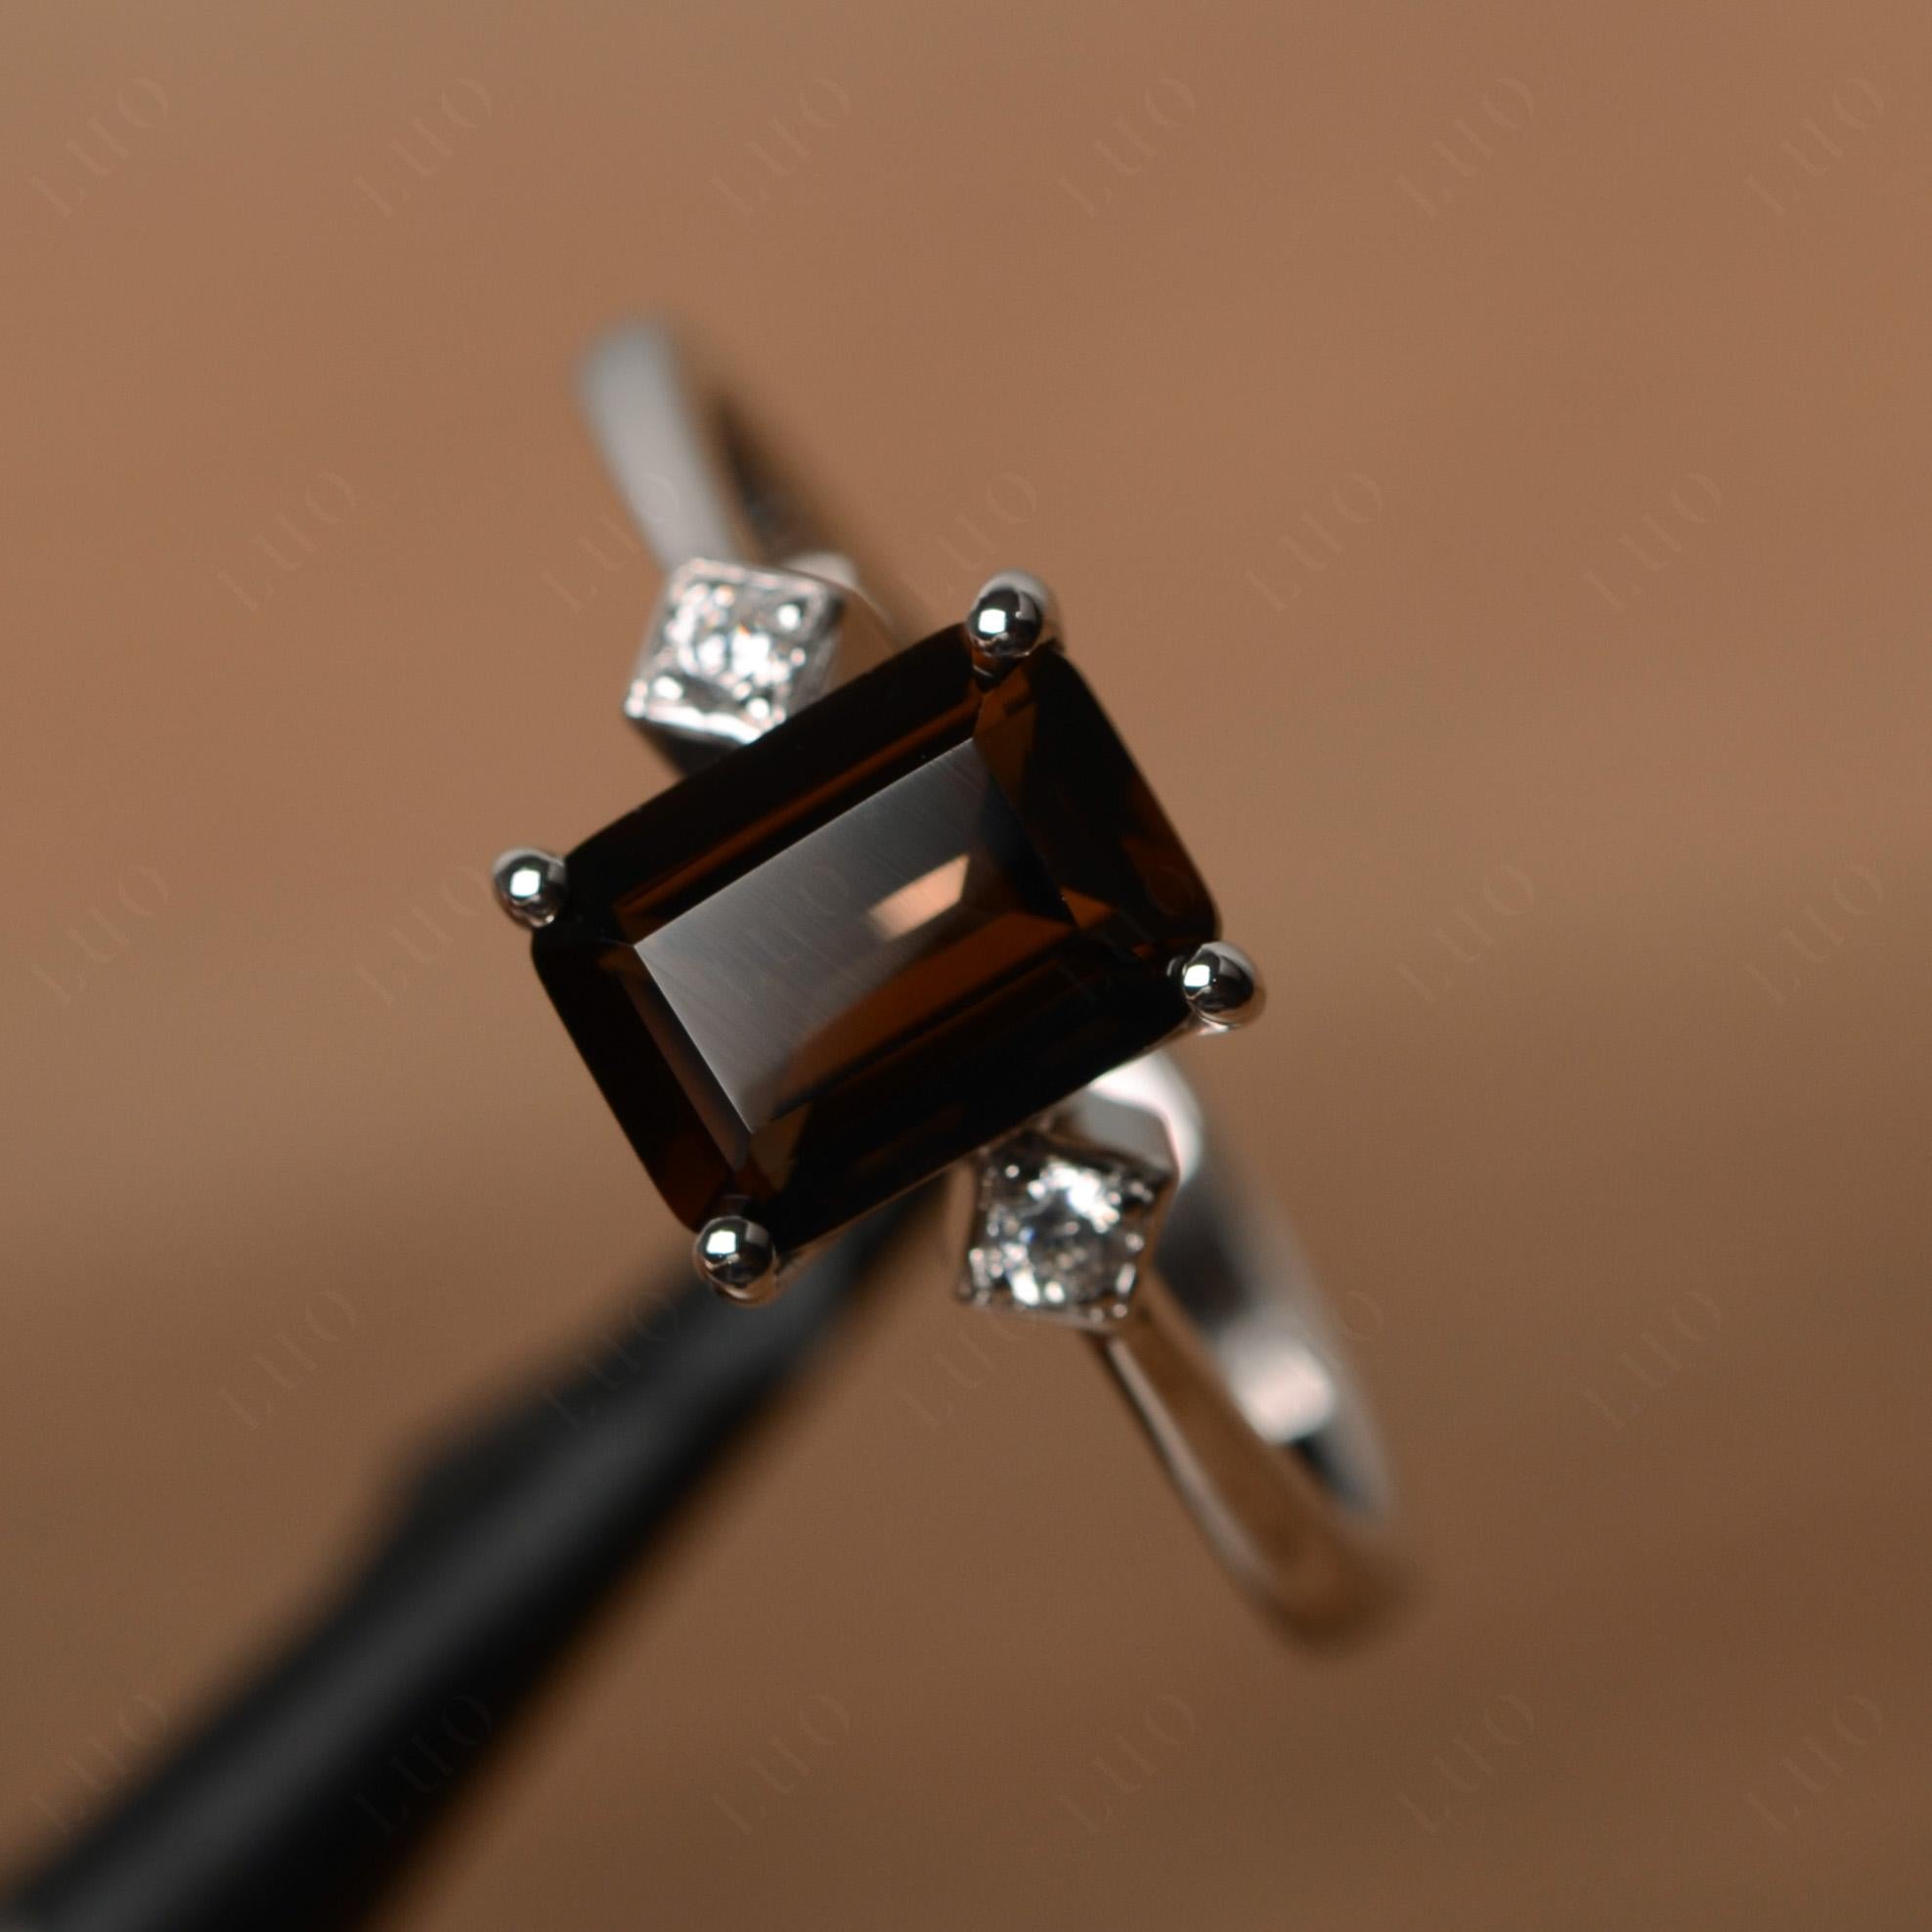 Emerald Cut Smoky Quartz Engagement Ring - LUO Jewelry